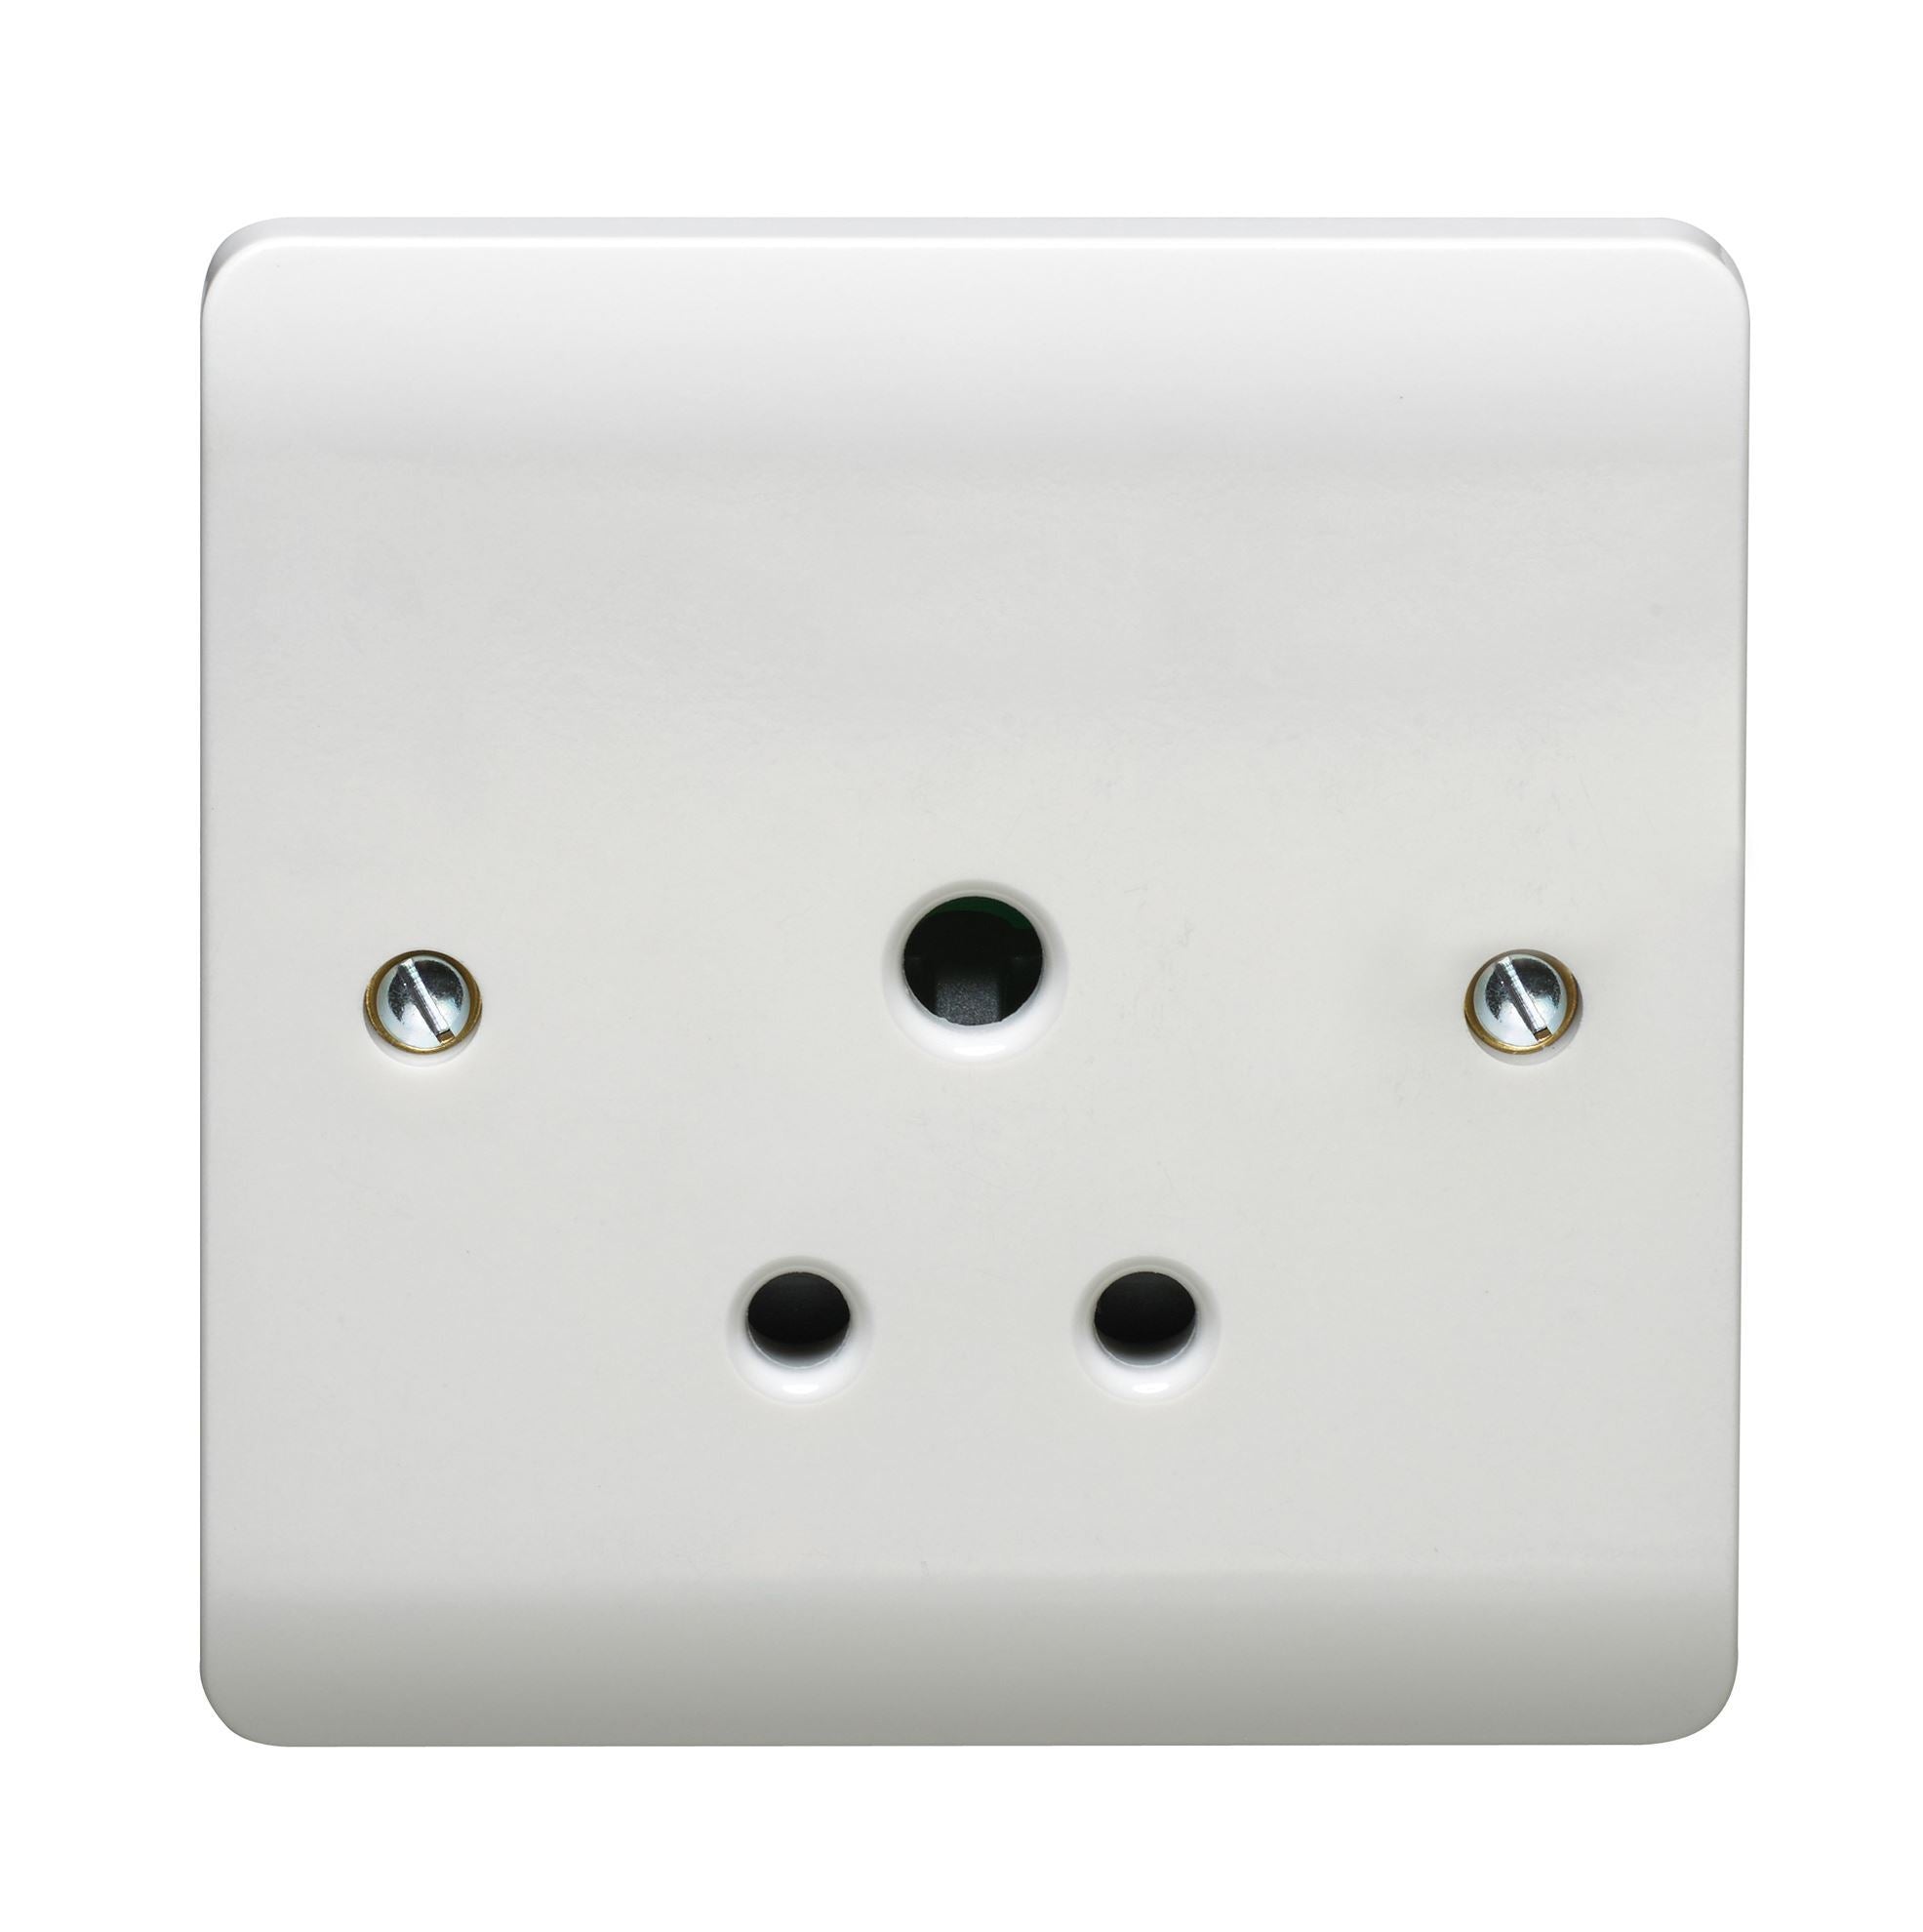 Crabtree Instinct 1G 5A Unswitched Socket Cr1047